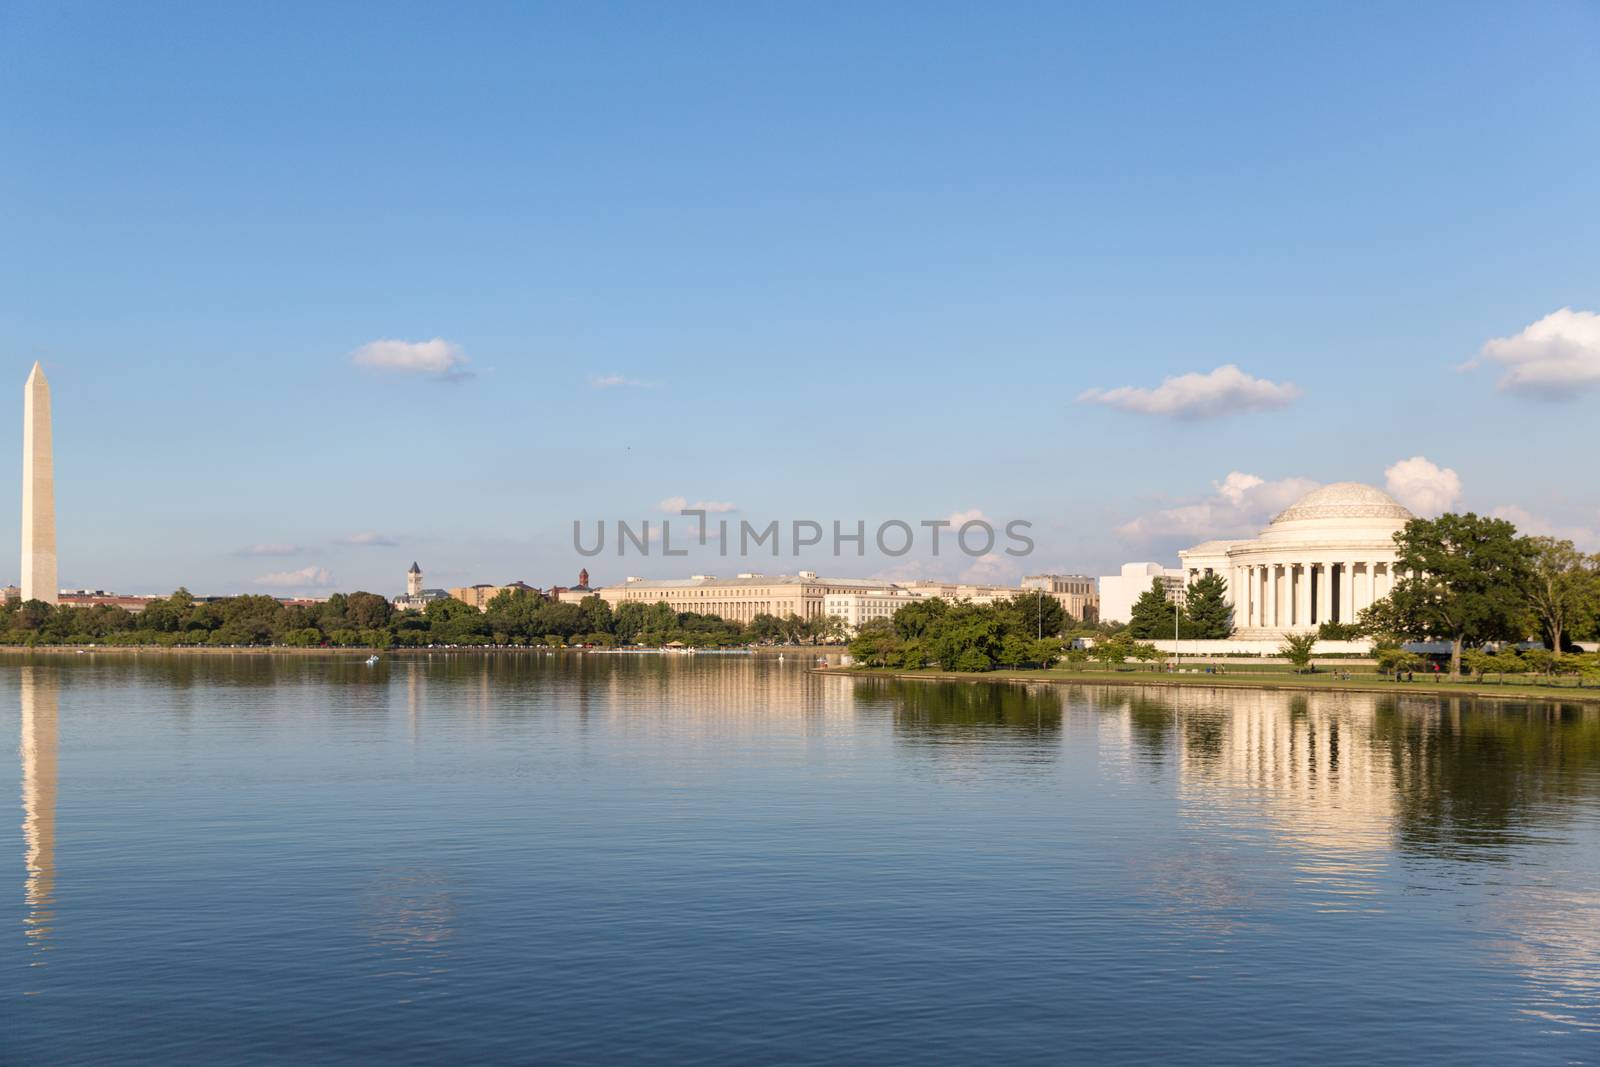 The Thomas Jefferson Memorial and the Monument